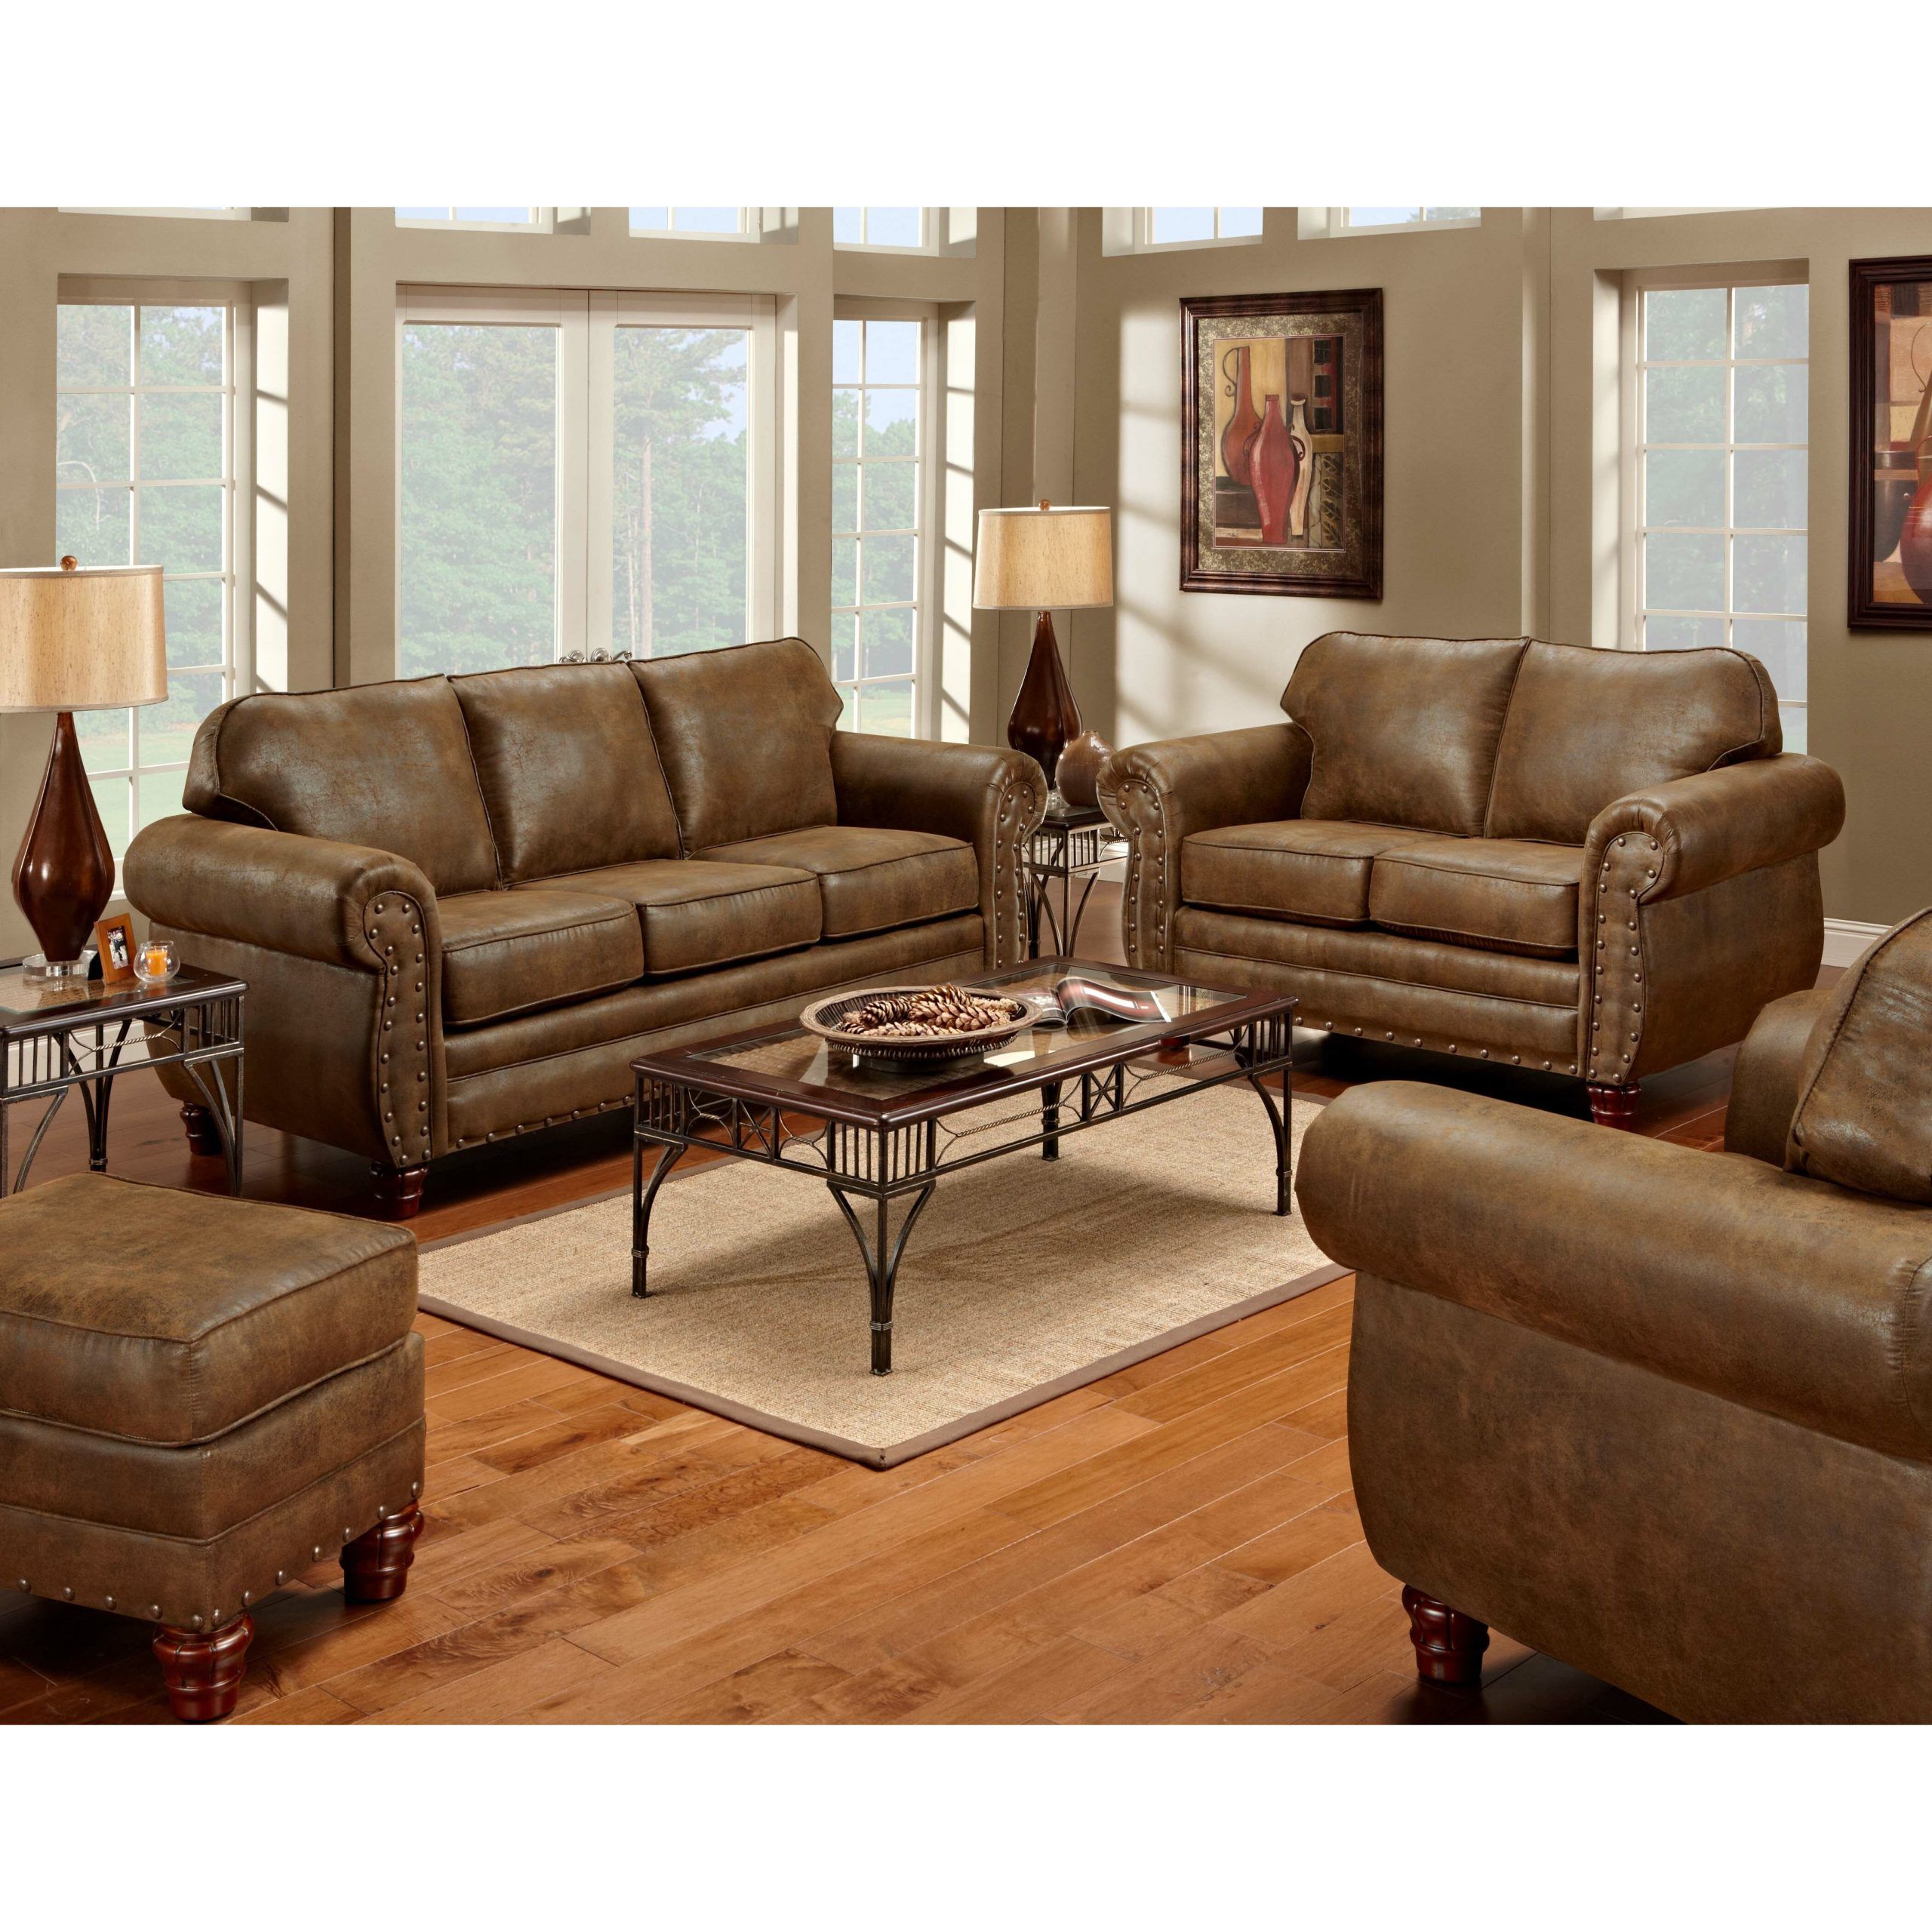 American Furniture Classics Sedona 4 Piece Living Room Set With Sleeper With Sofas For Living Rooms (Gallery 7 of 20)